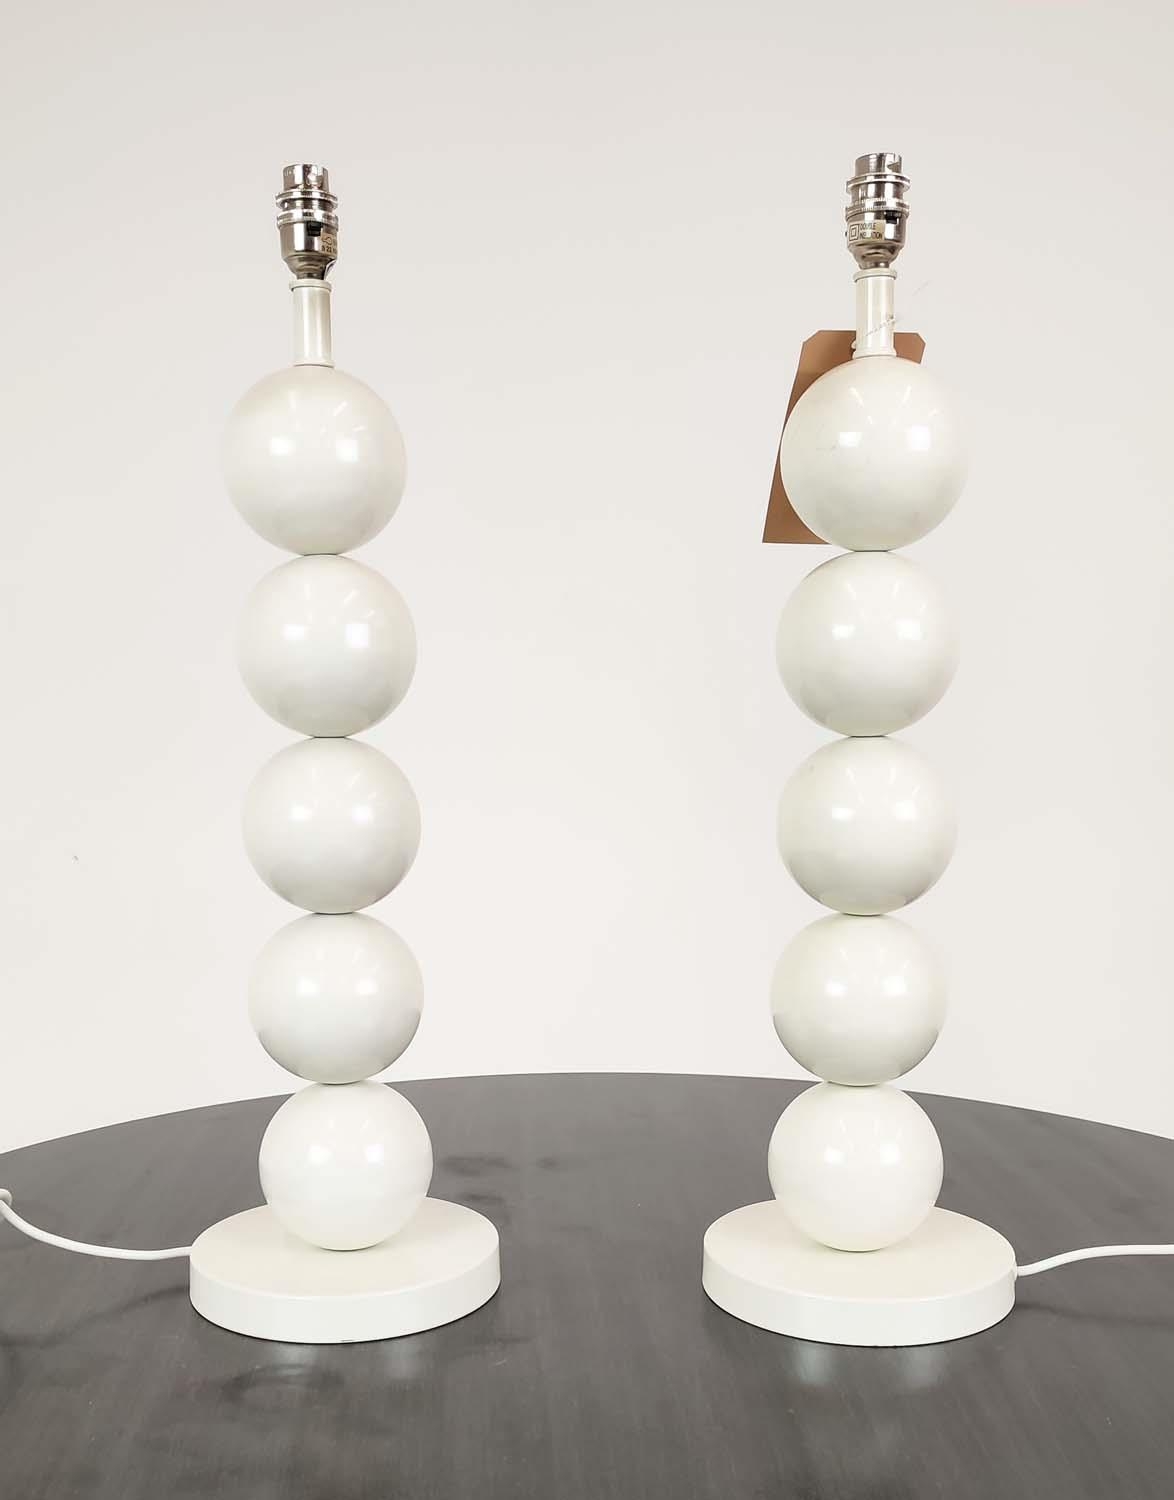 COACH HOUSE TABLE LAMPS, a pair, white metal ball stems, 62cm H. (2) - Image 2 of 5